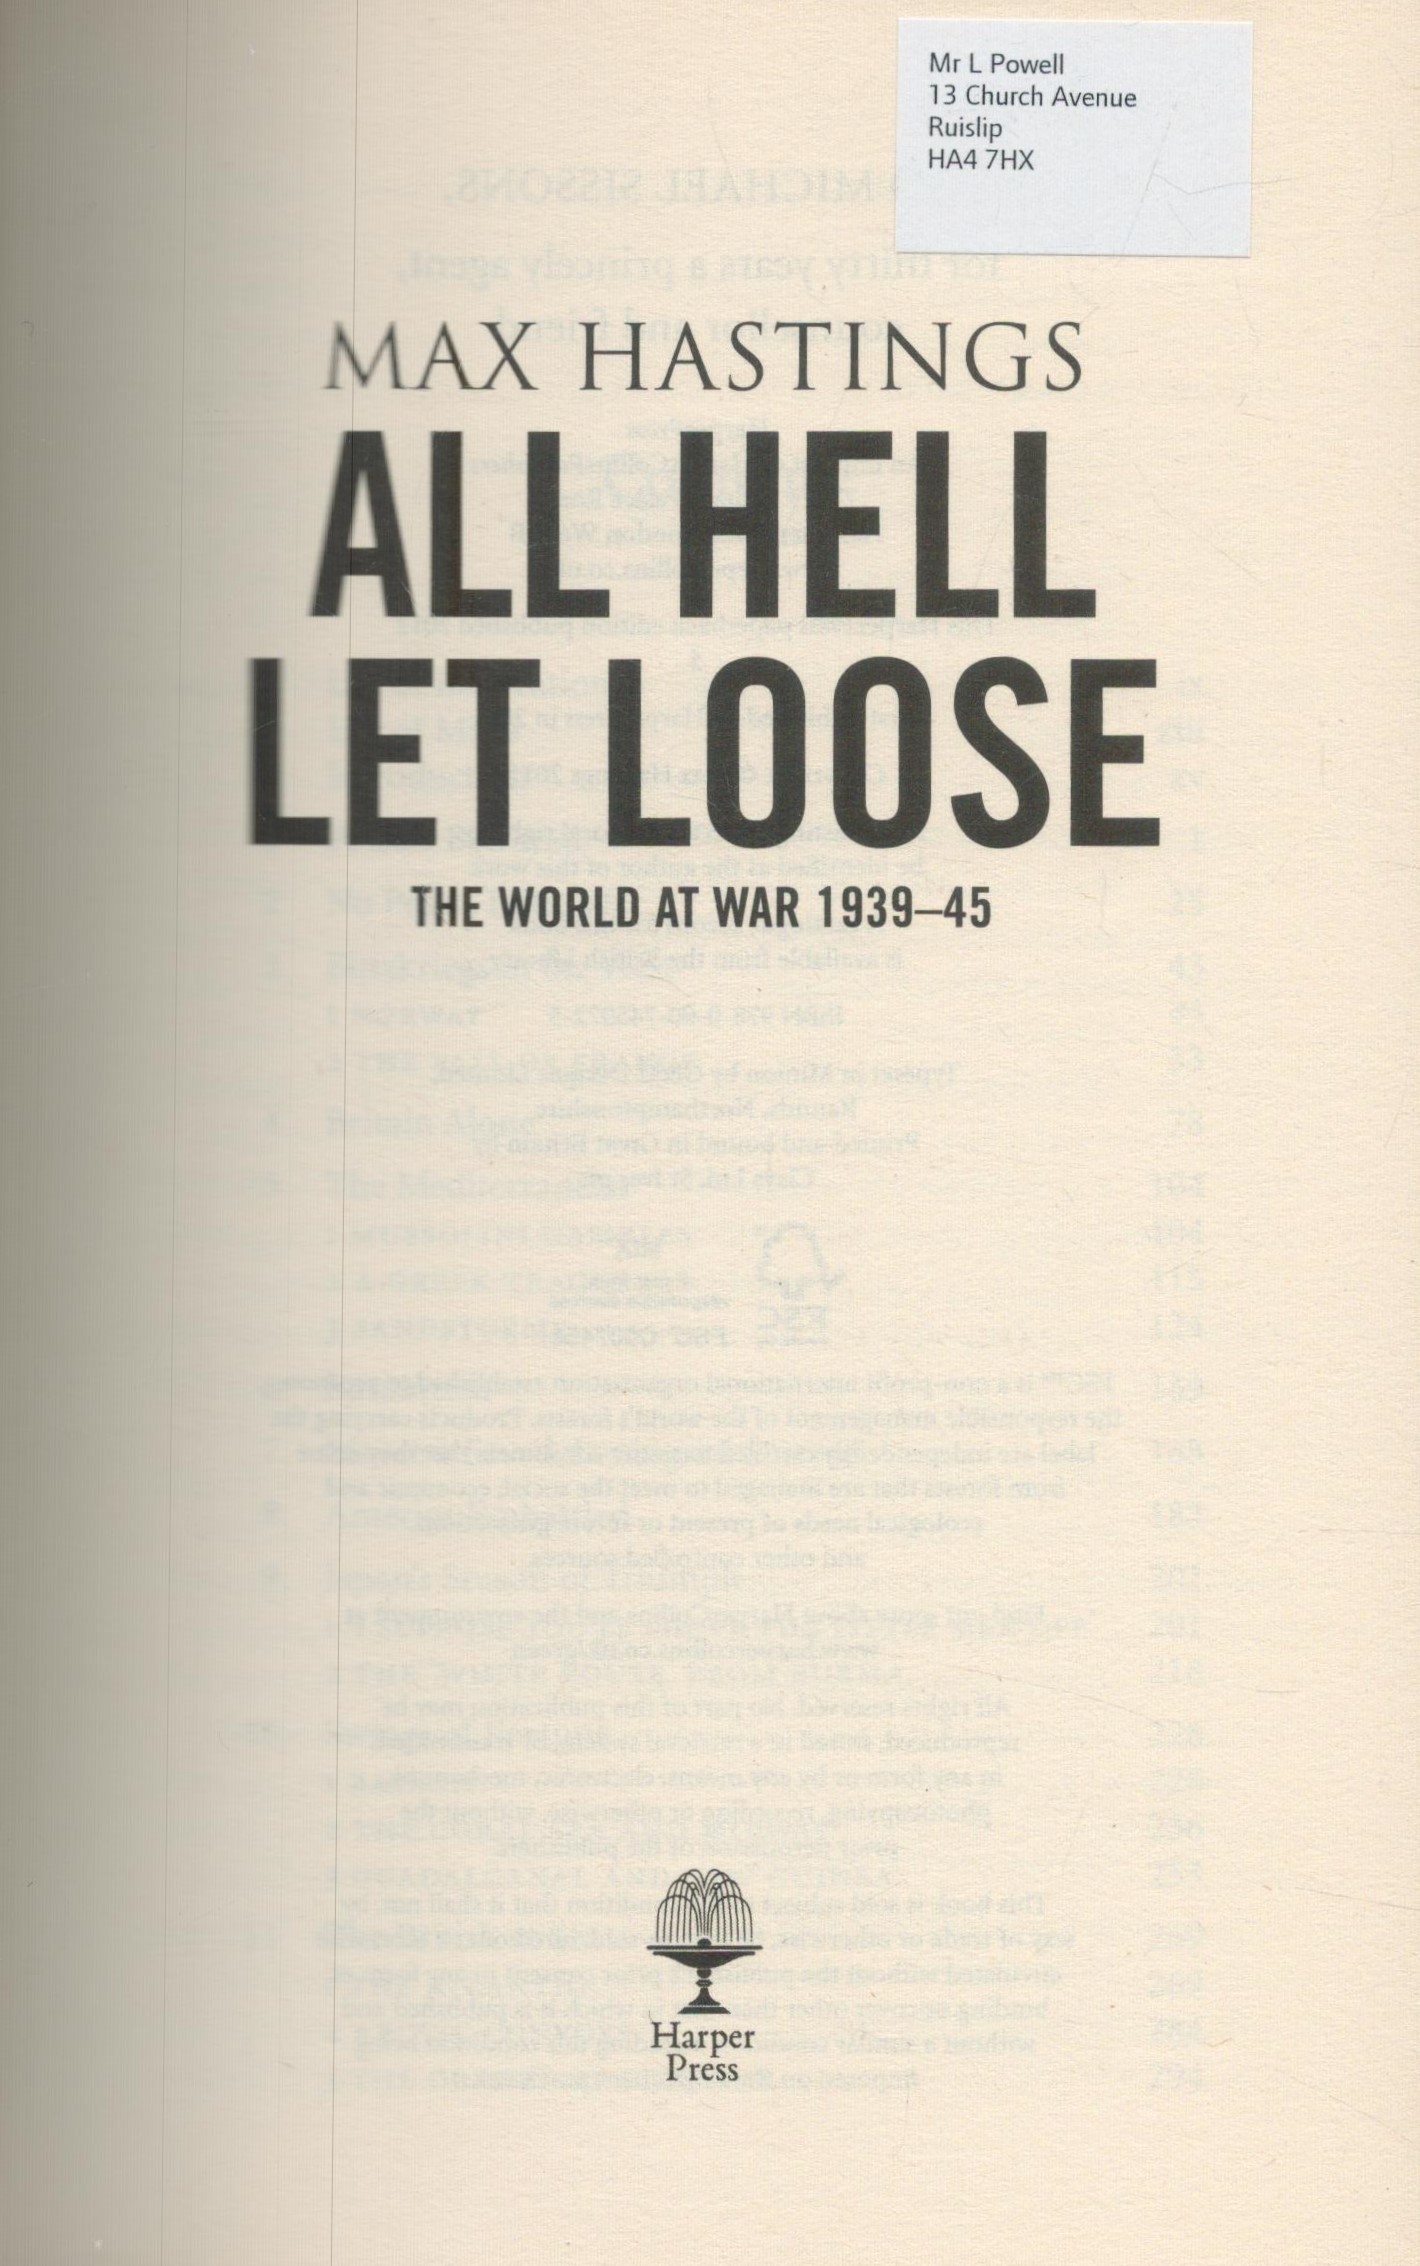 All Hell Let Loose - The World at War 1939-1945 by Max Hastings 2012 Softback Book with 748 pages - Image 4 of 9